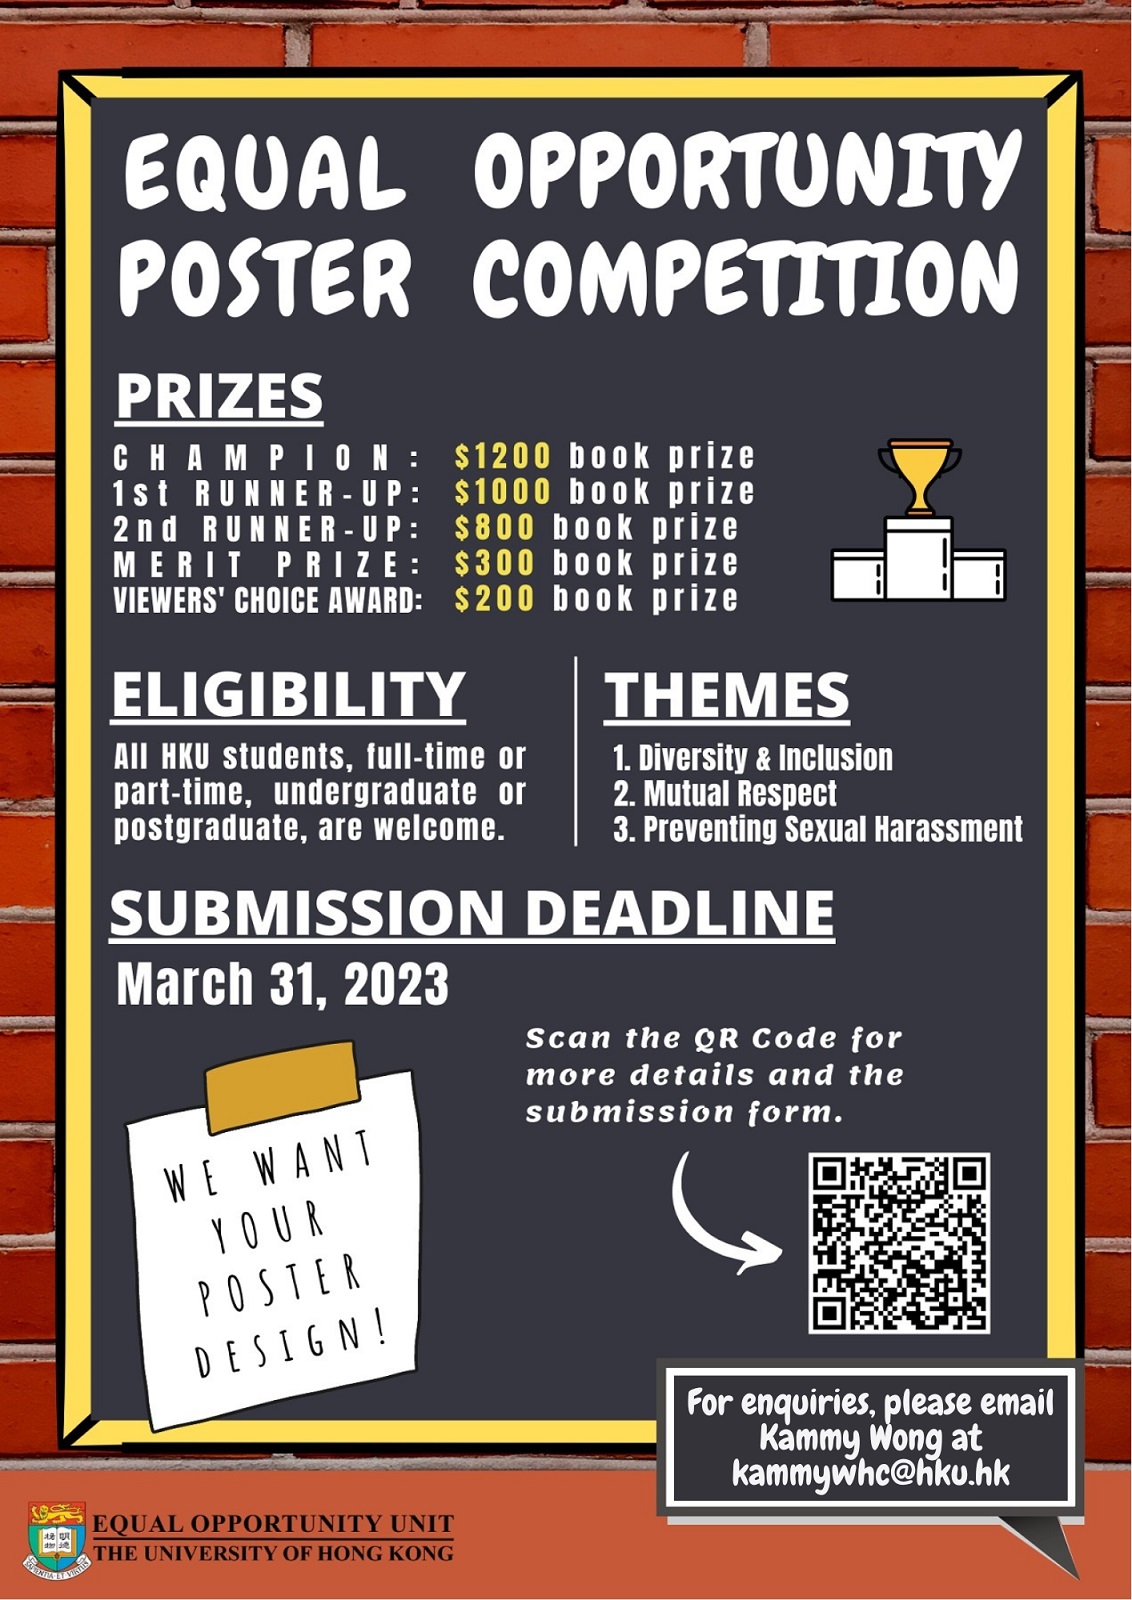 Equal Opportunity Poster Competition: Content same as text